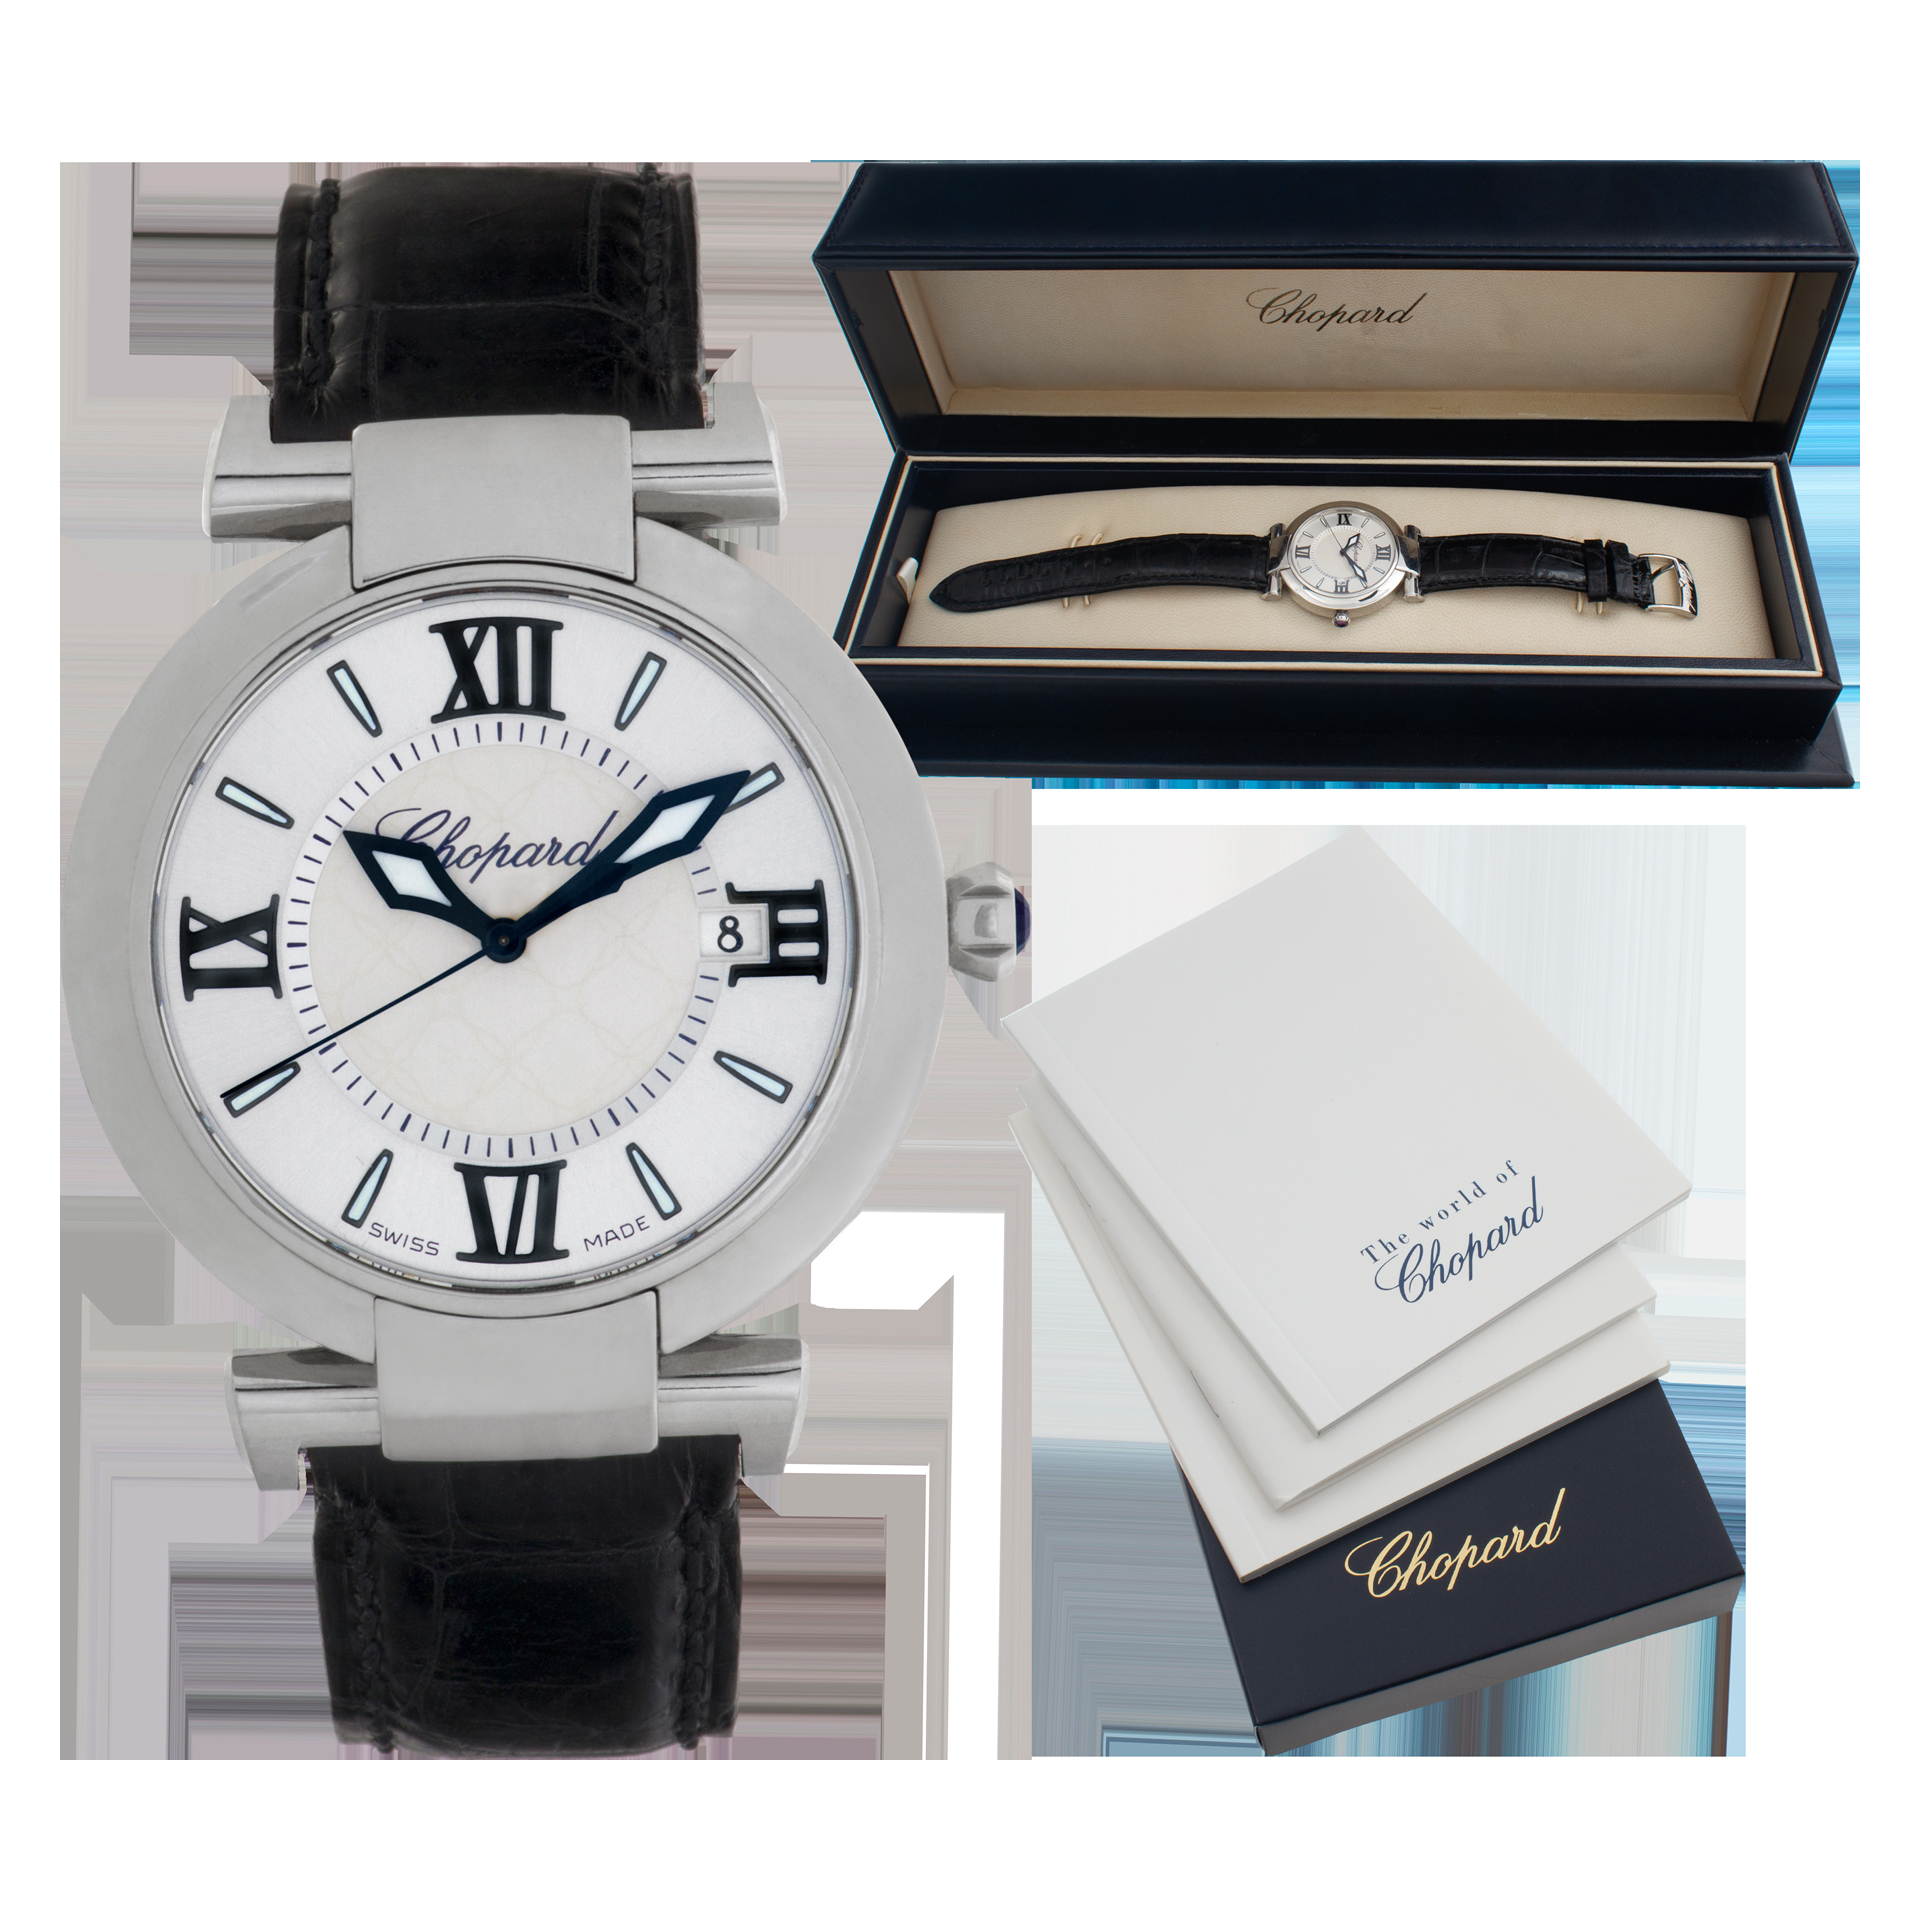 Chopard Imperiale 36mm 8532 image 8